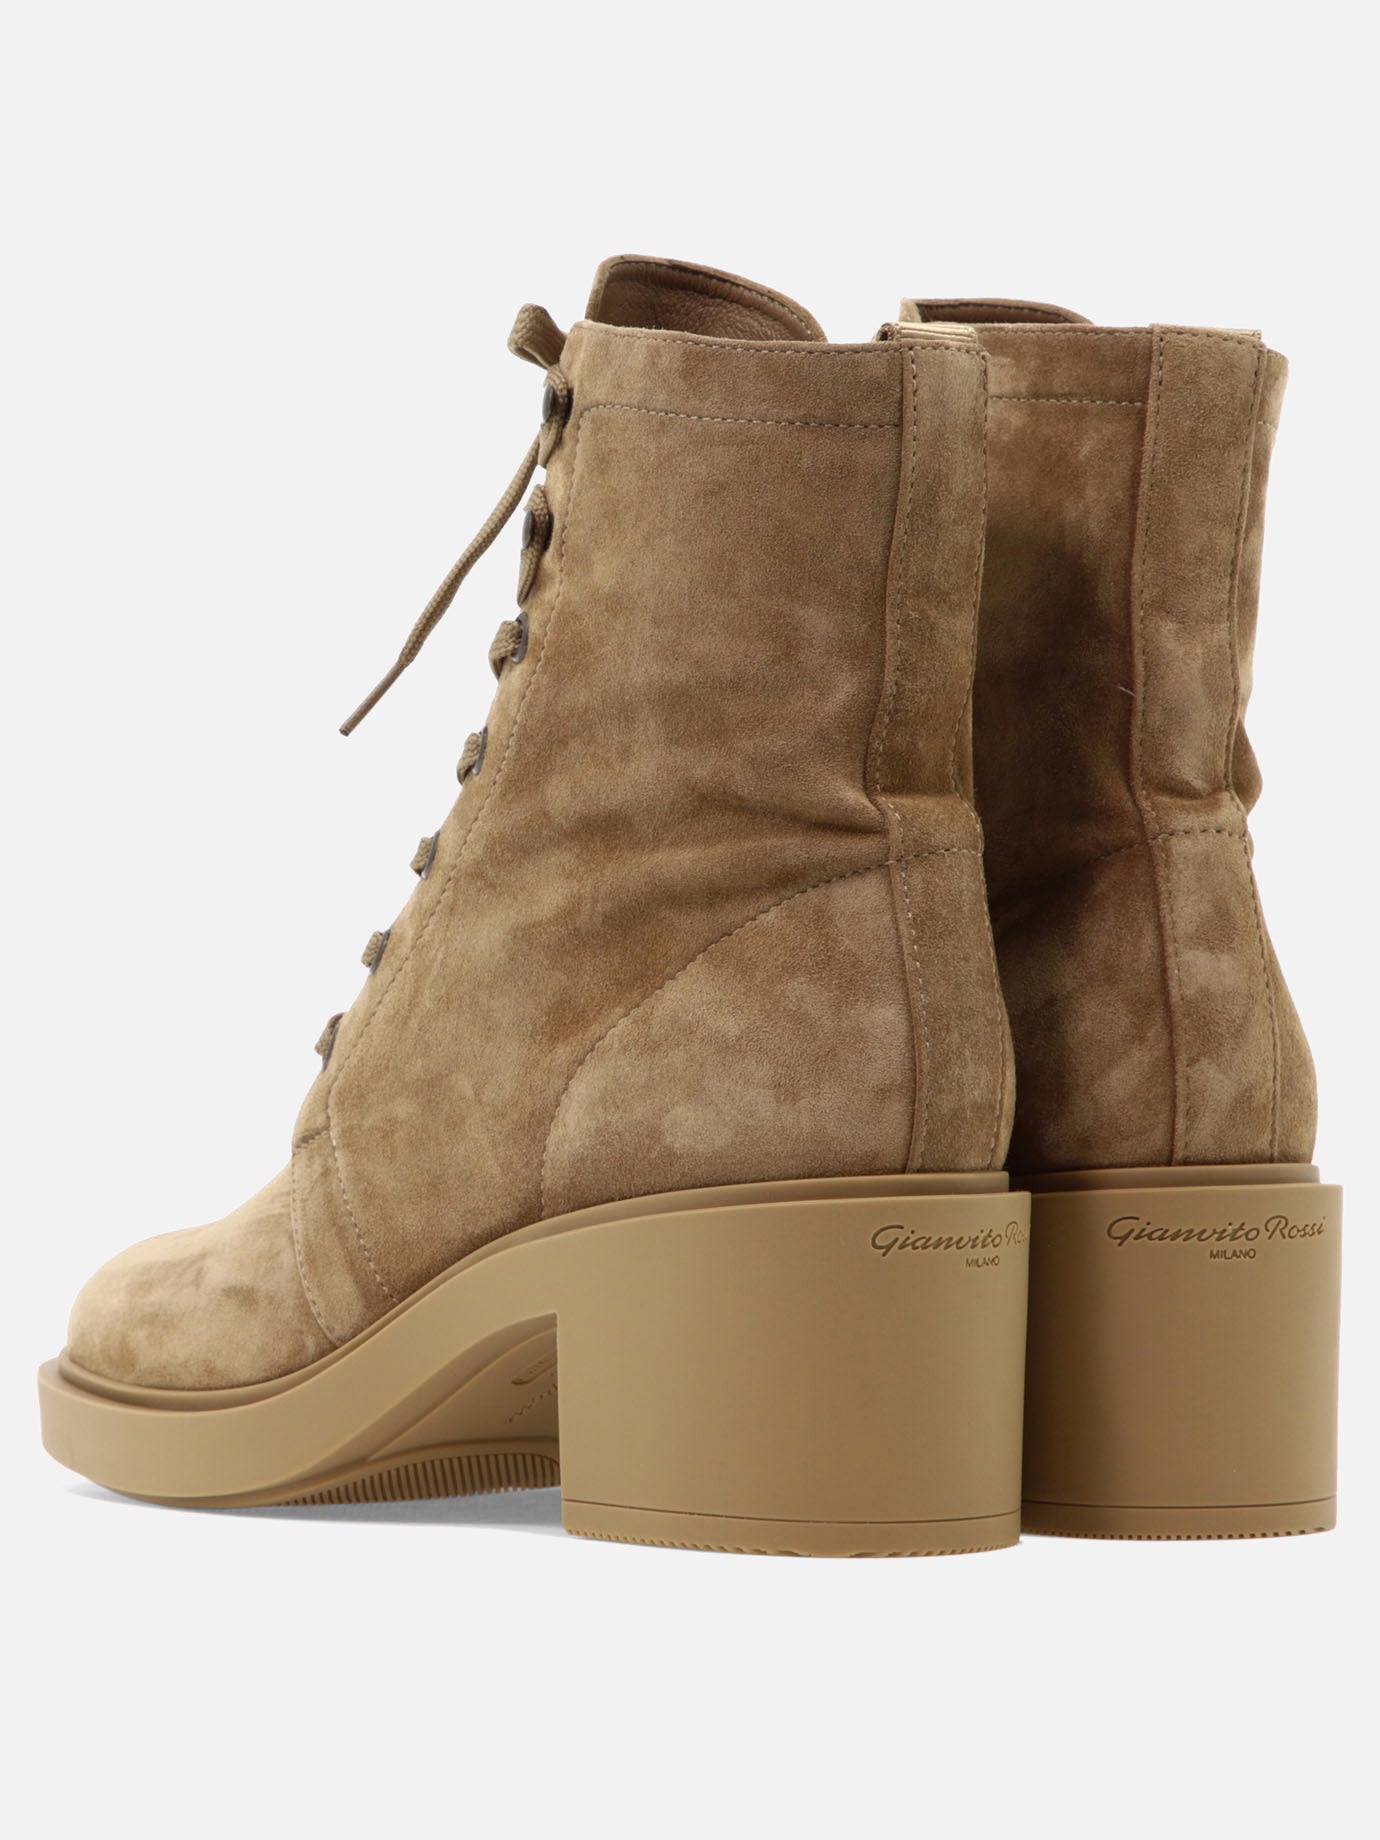 "Foster" lace-up boots